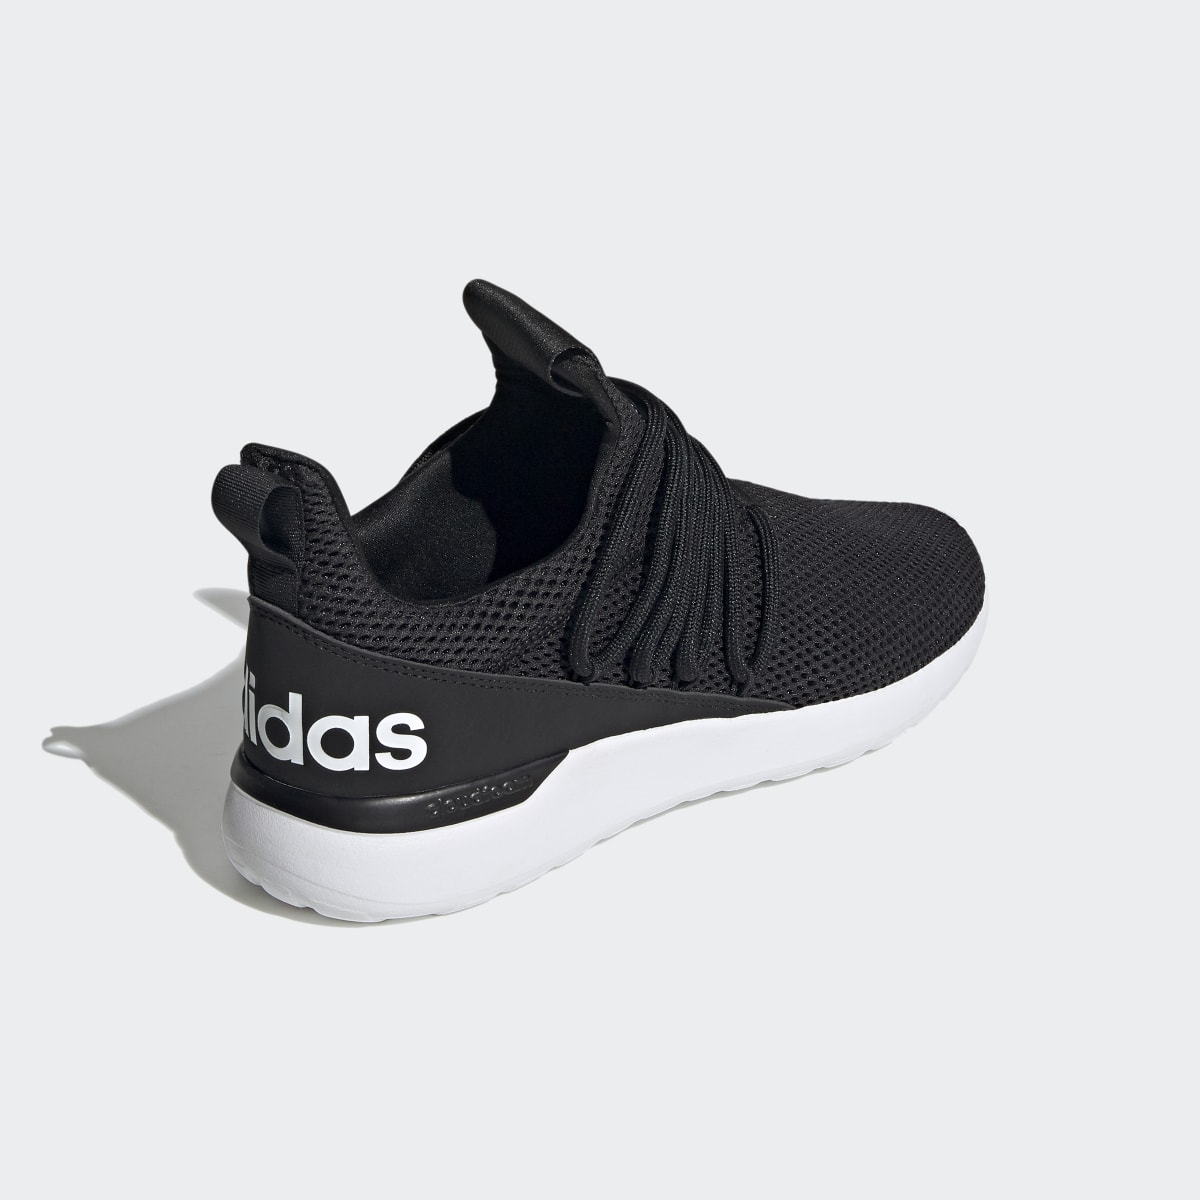 Adidas Lite Racer Adapt 3.0 Shoes. 6